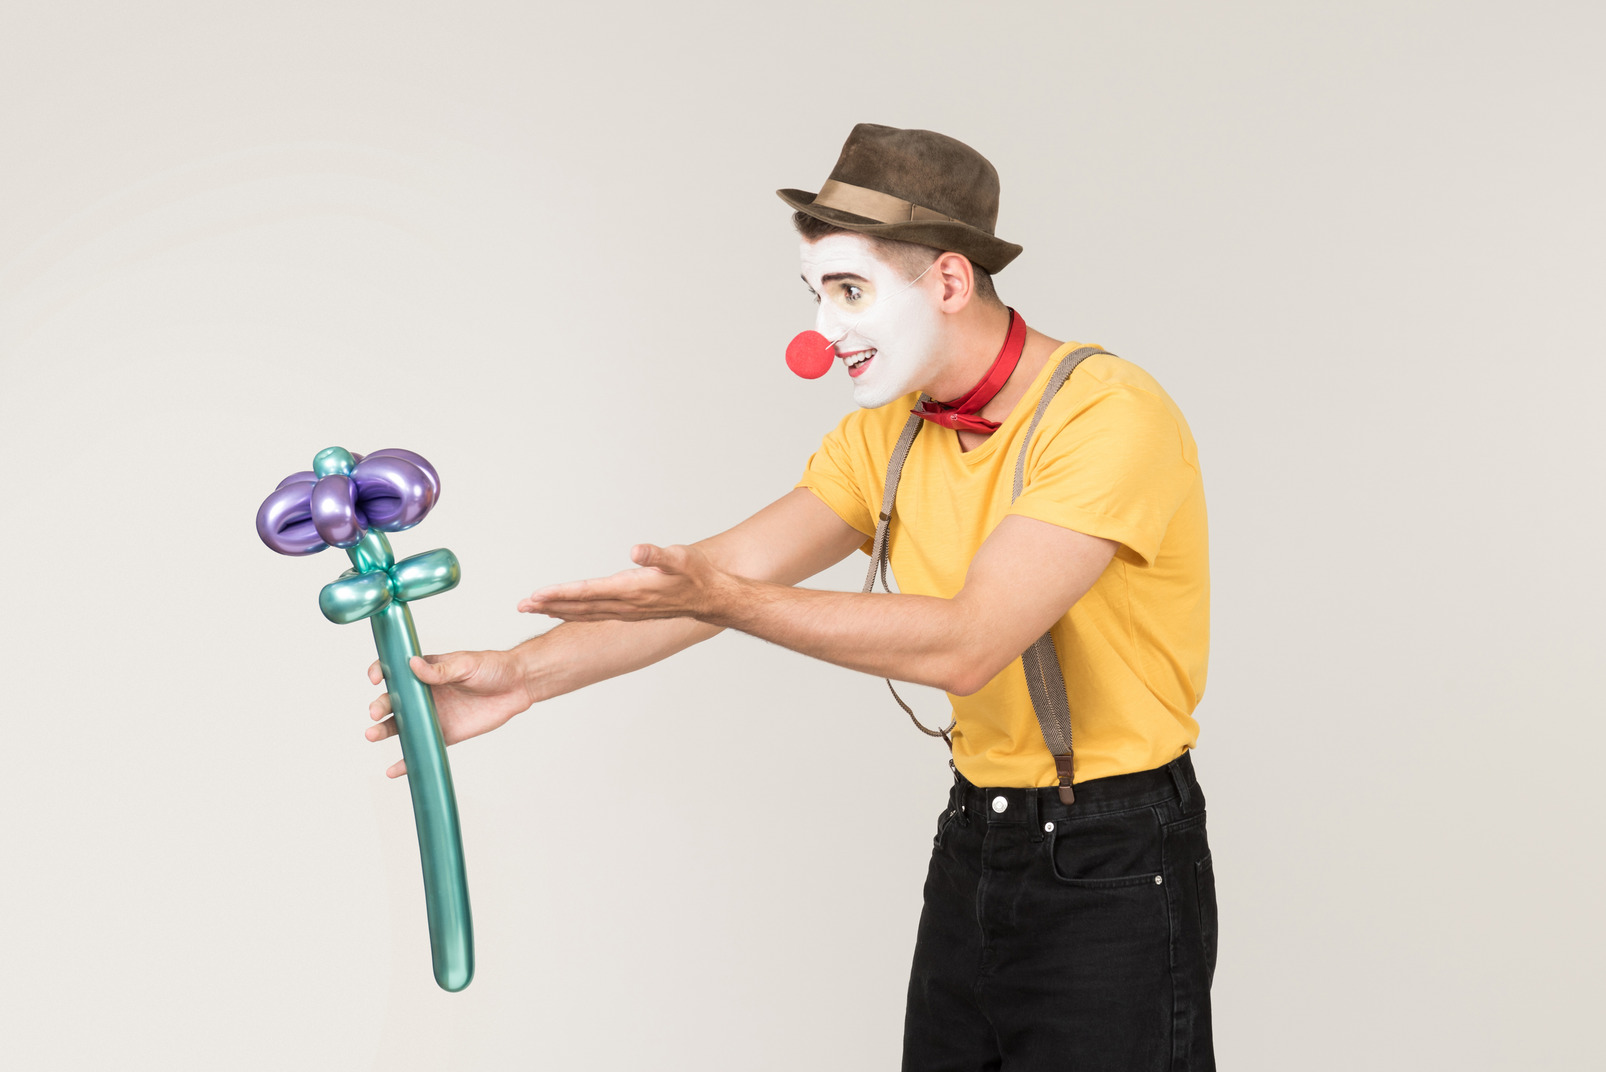 Male clown pointing at flower he's holding